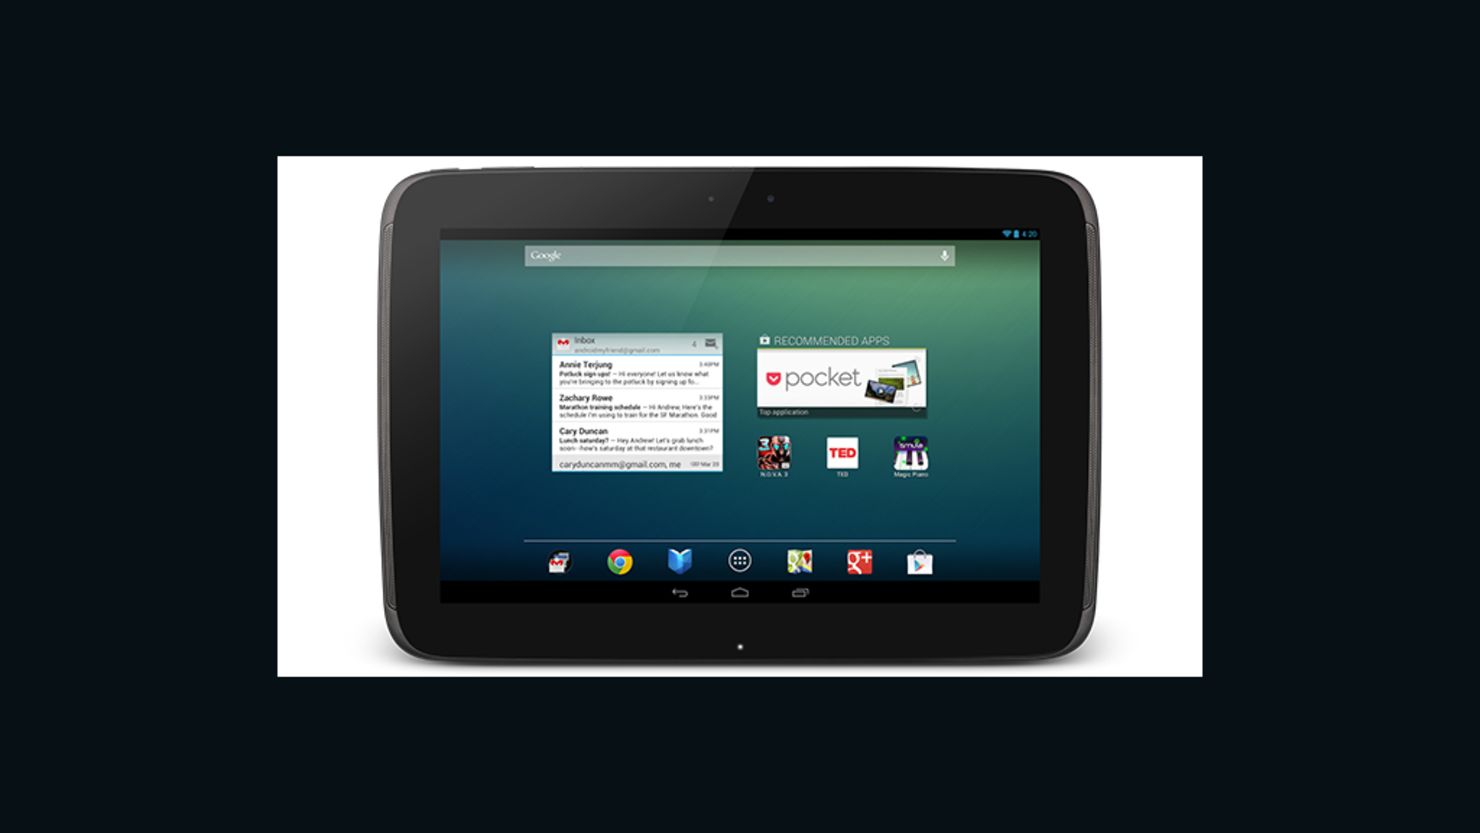 Google and Samsung have teamed up for the Nexus 10 Android tablet, coming November 13.